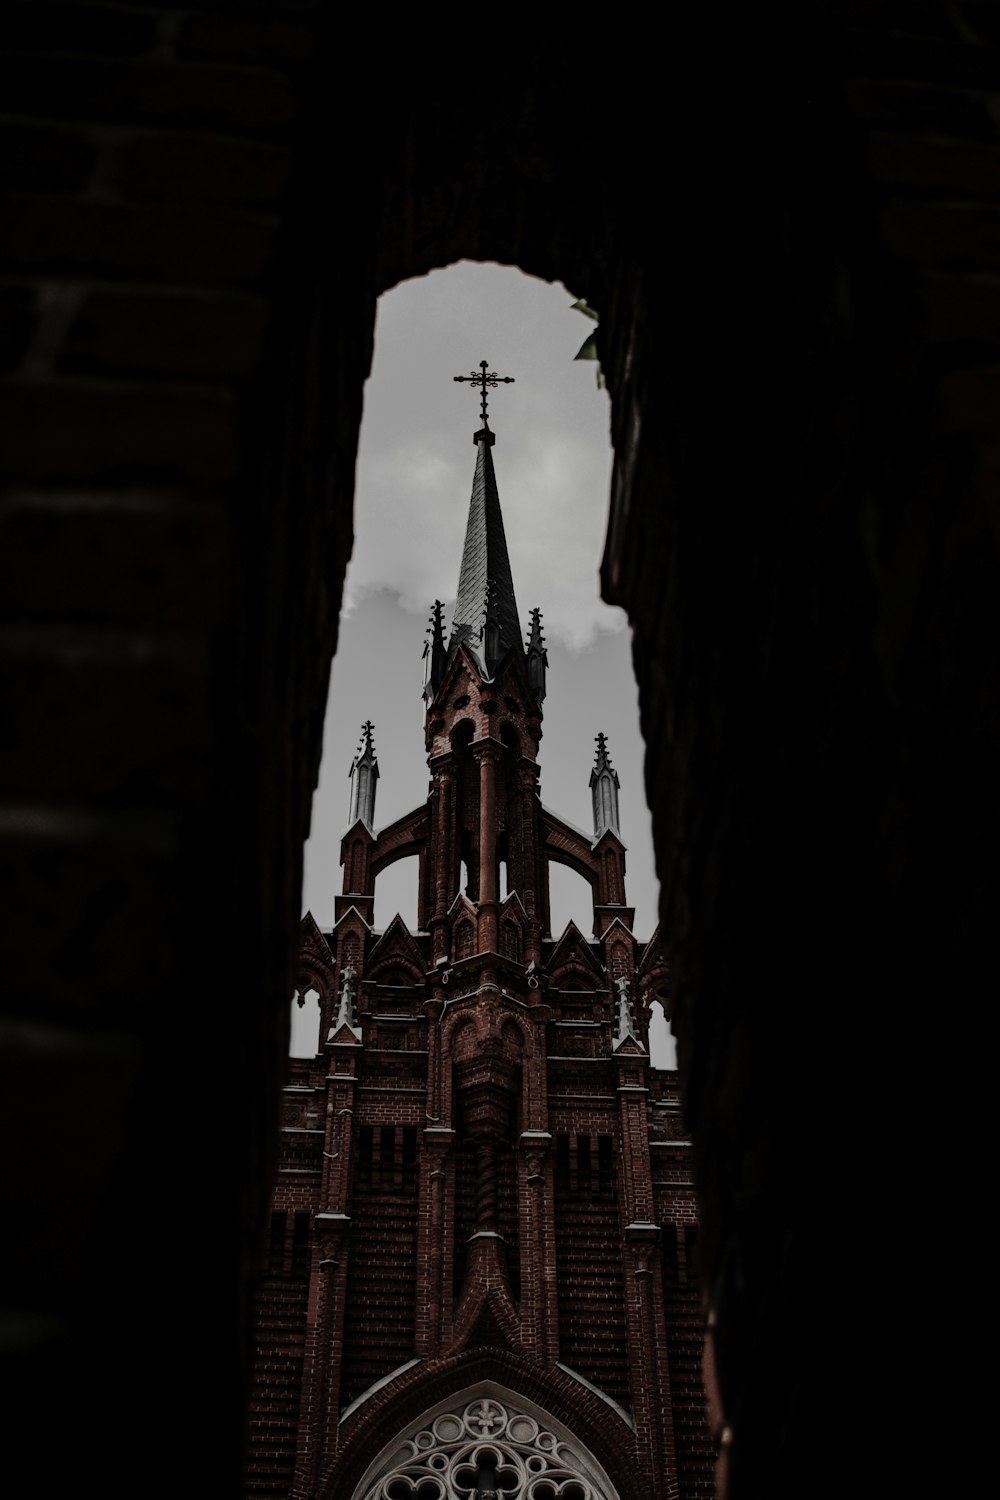 a church with a steeple seen through a hole in the wall